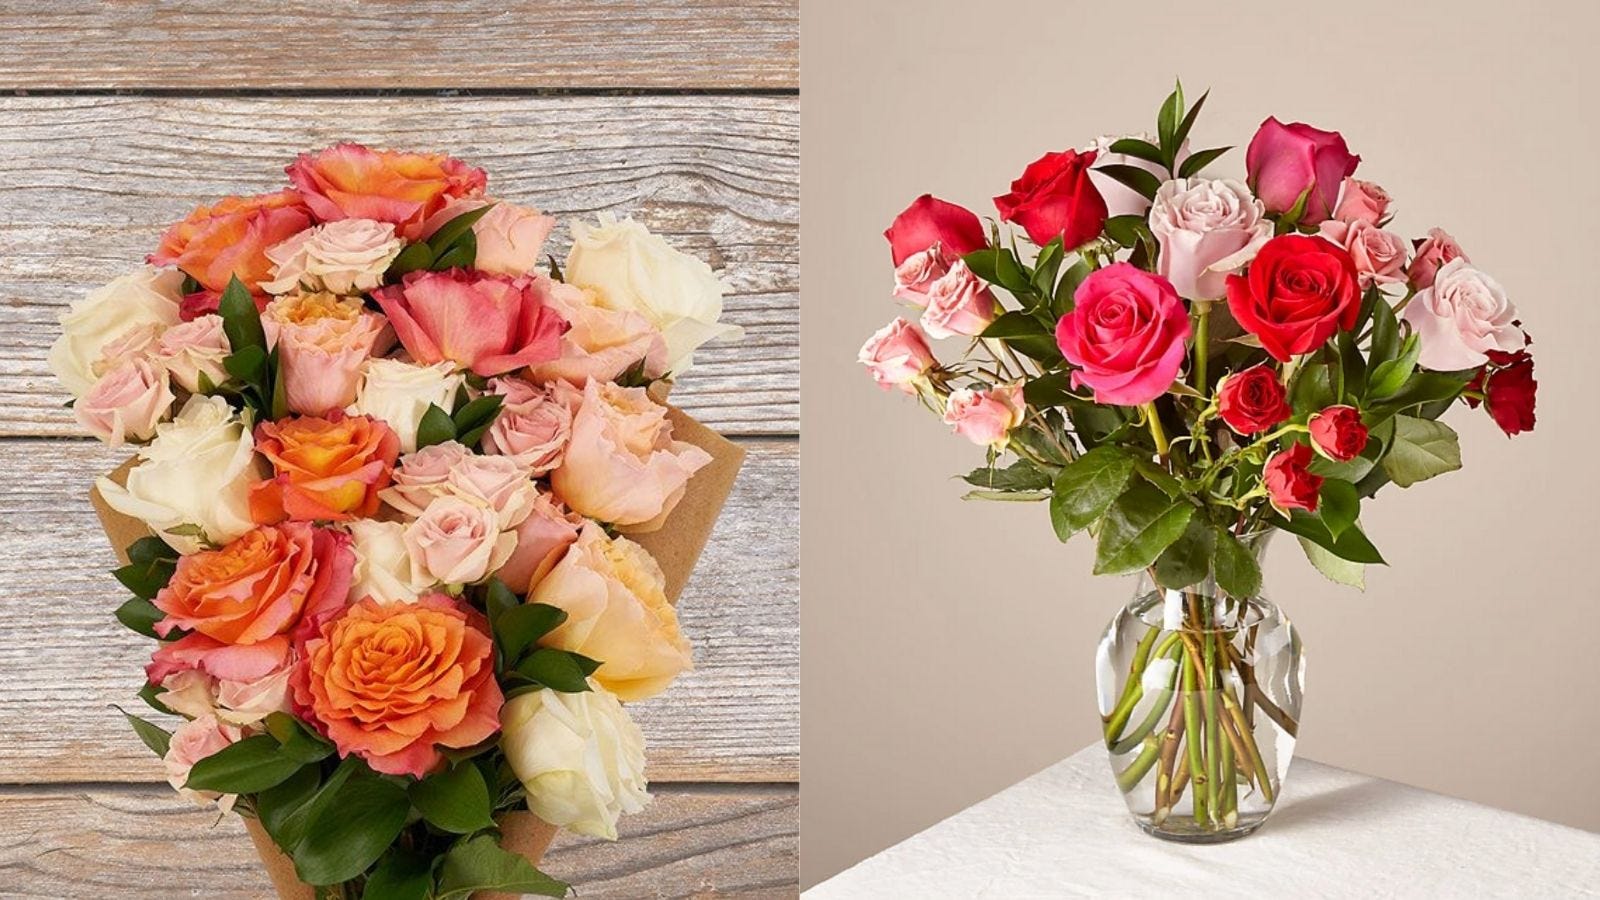 20 personalized Valentine's Day gifts anyone would love this year